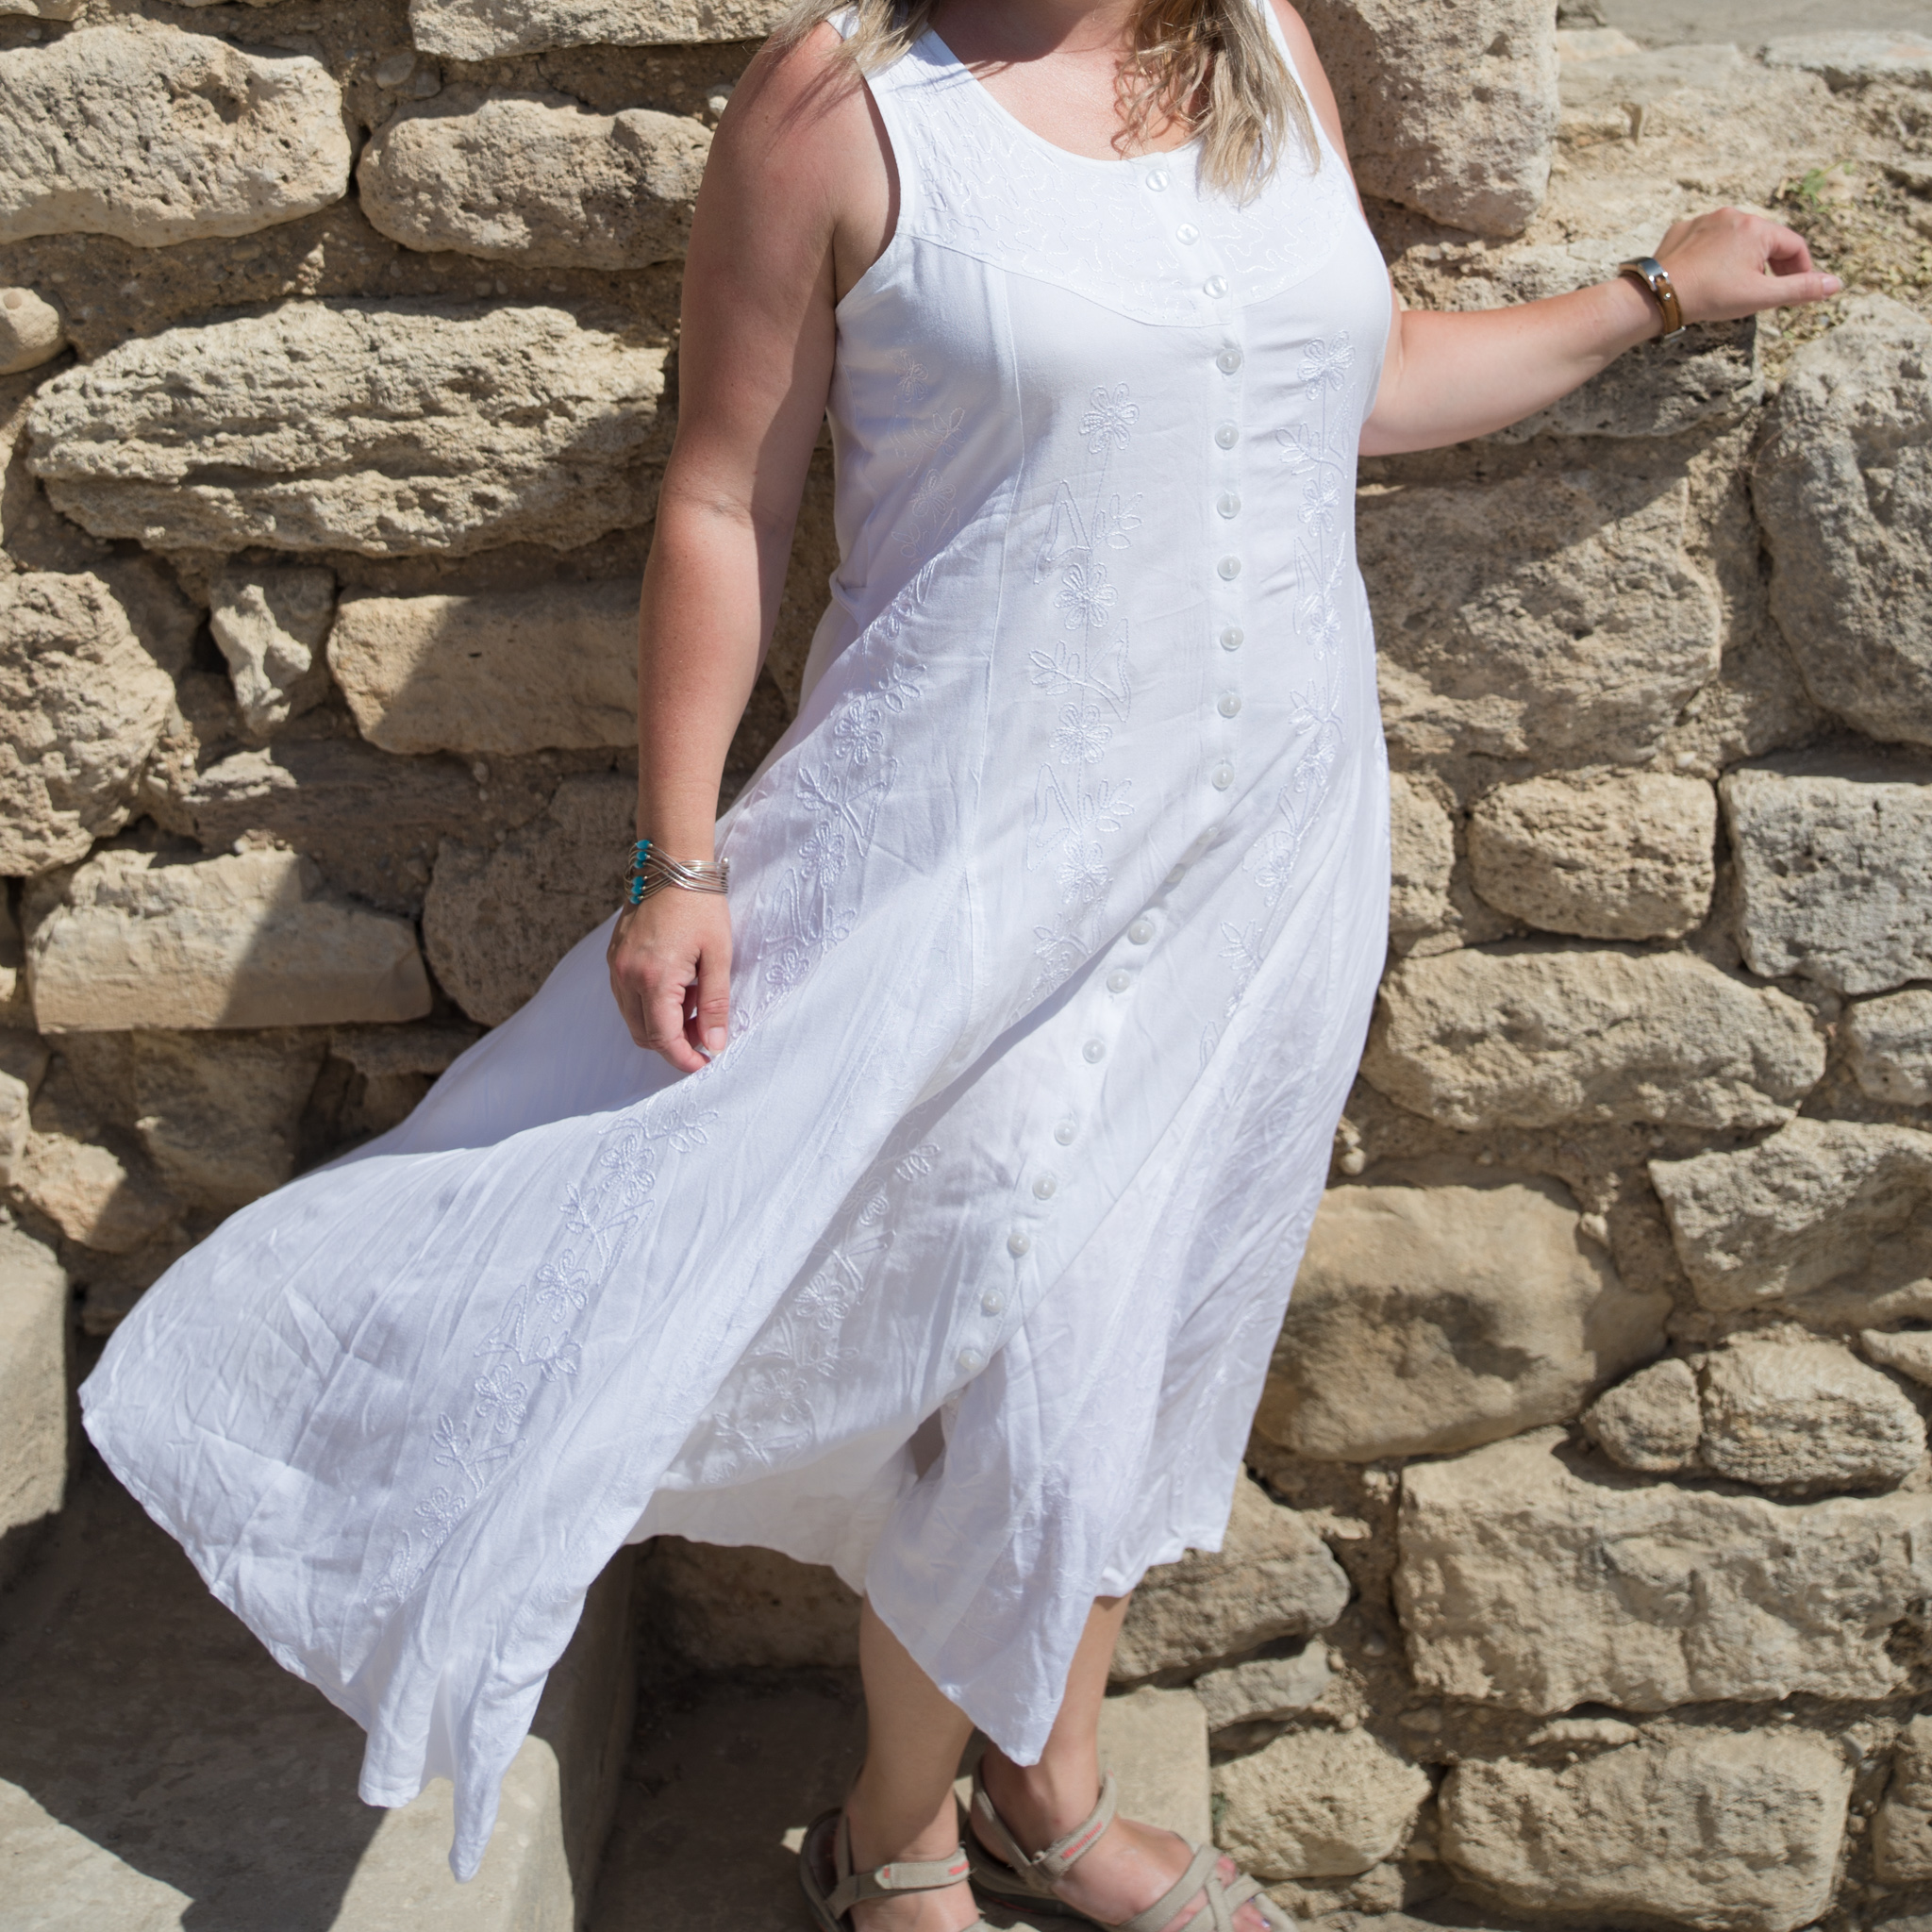 Styling the summer holiday white dress (Or winter portrait photography ...